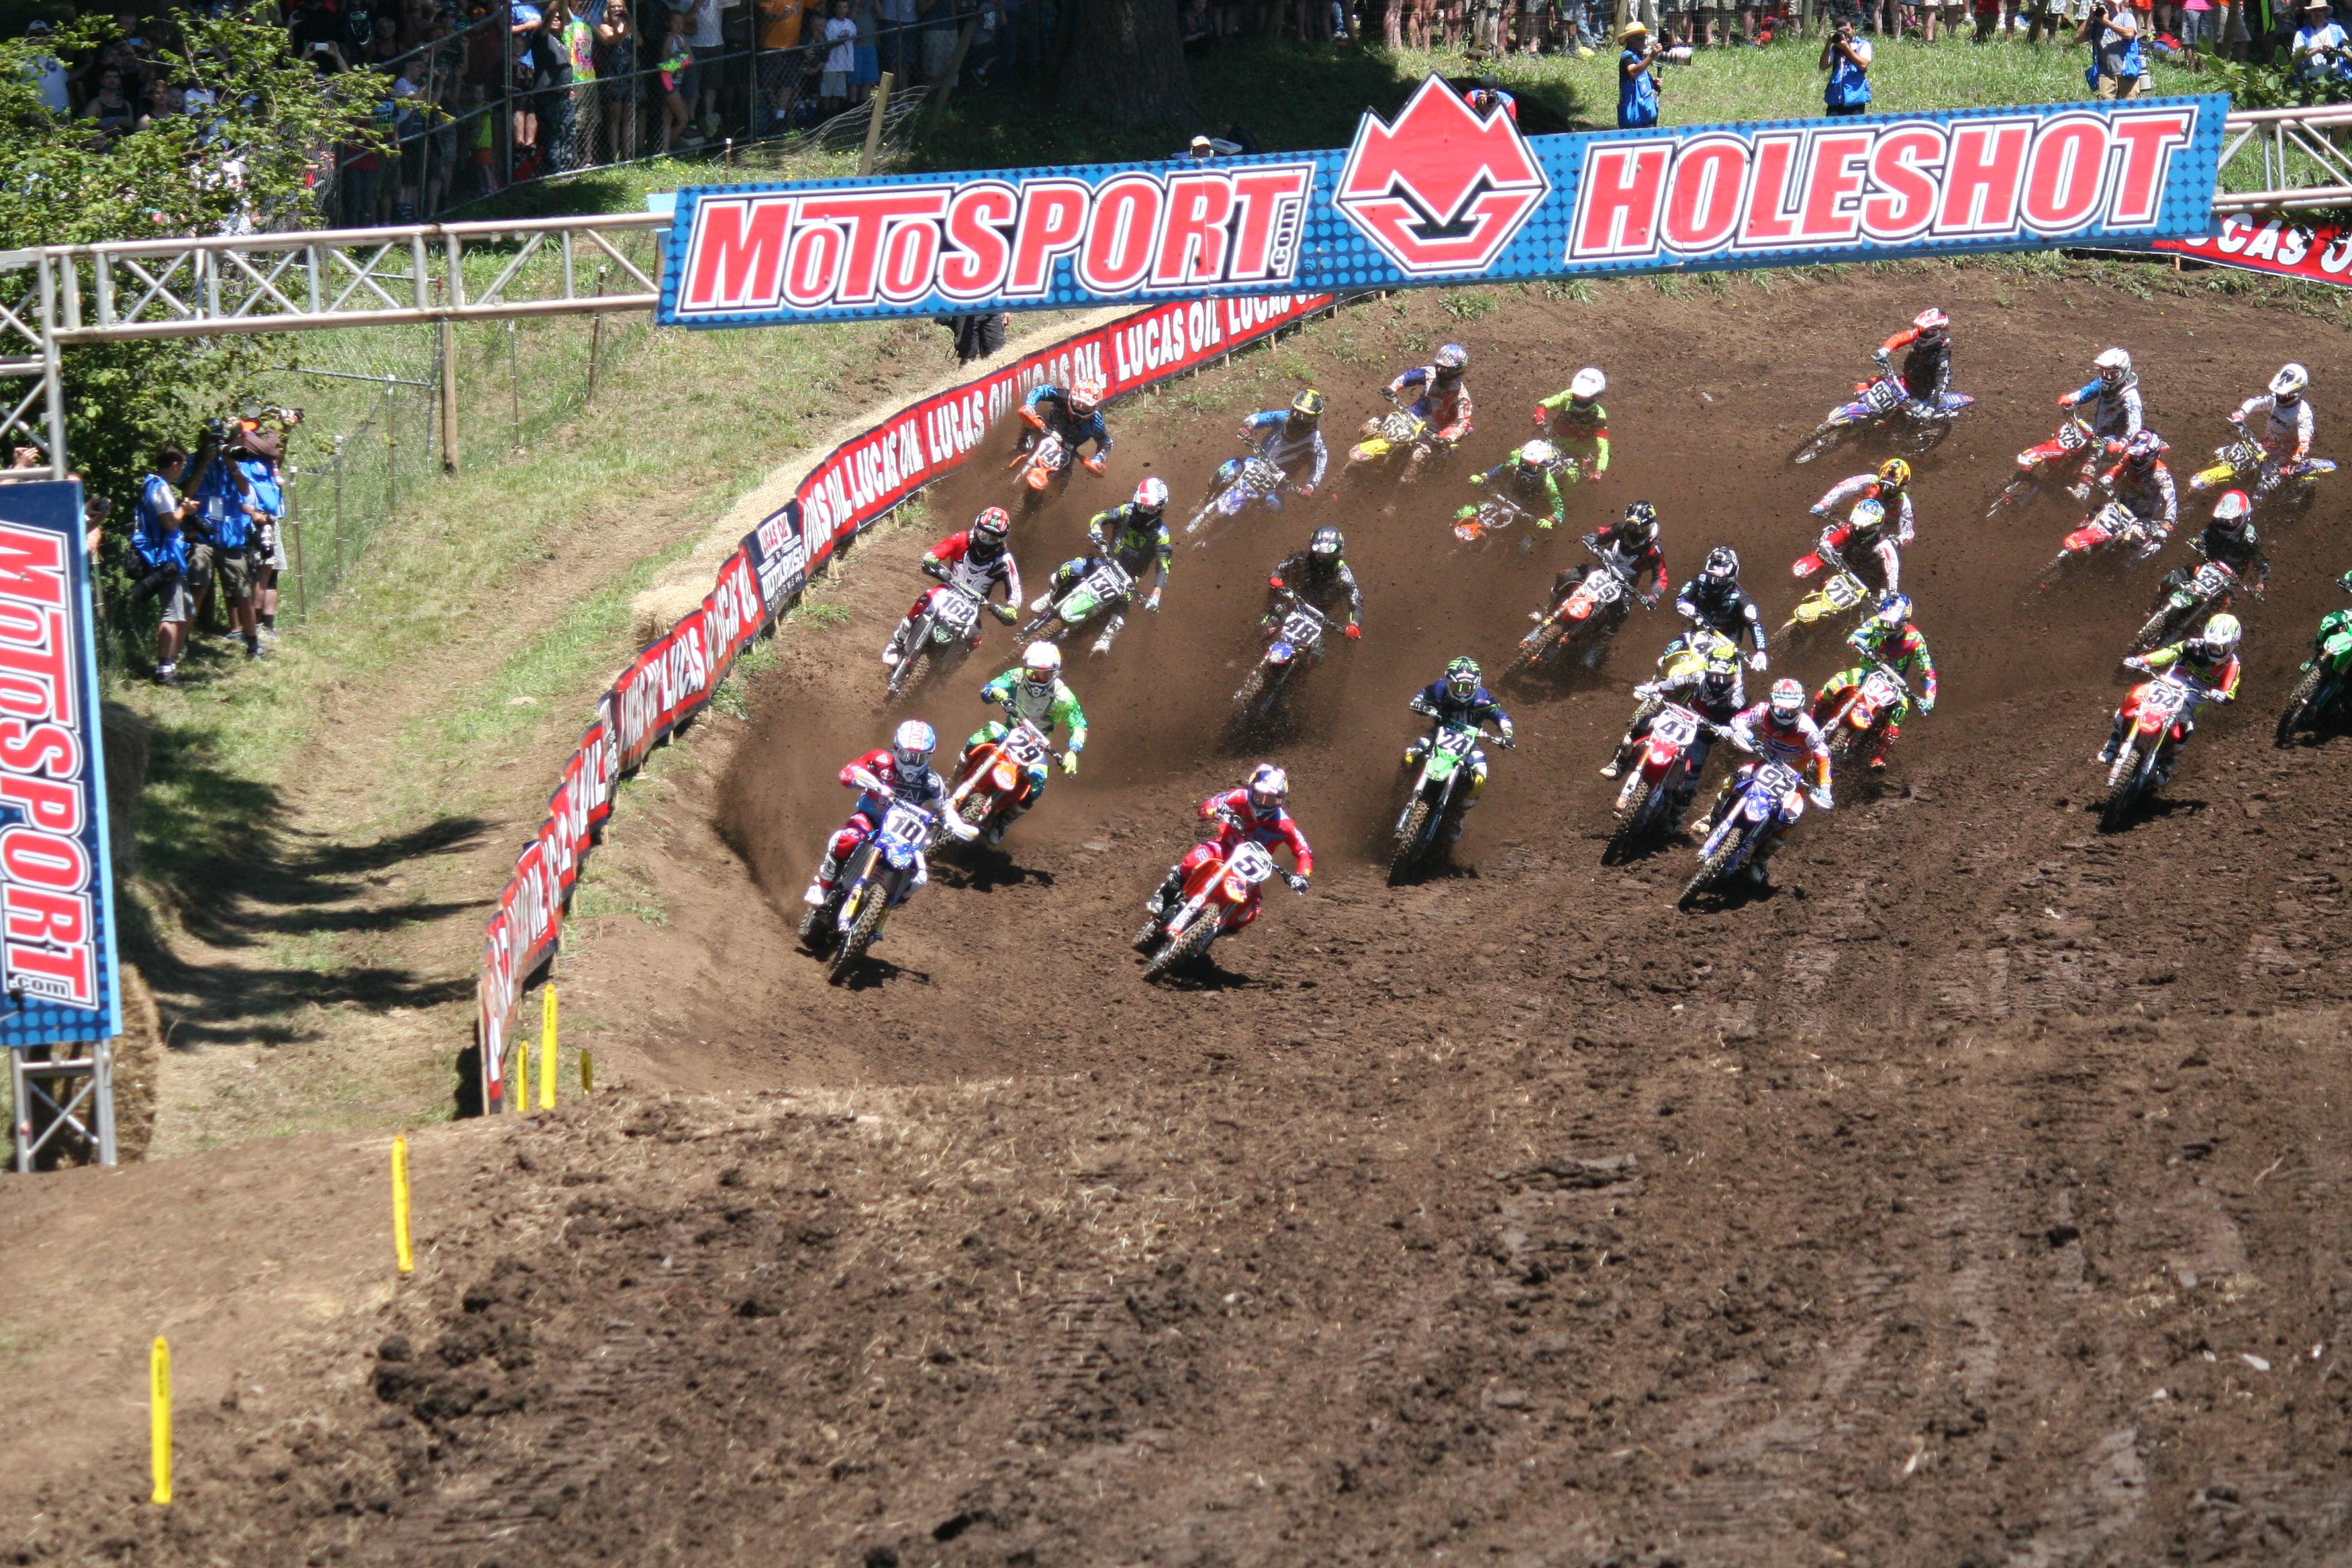 The 34th Washougal National Motocross Championship begins.